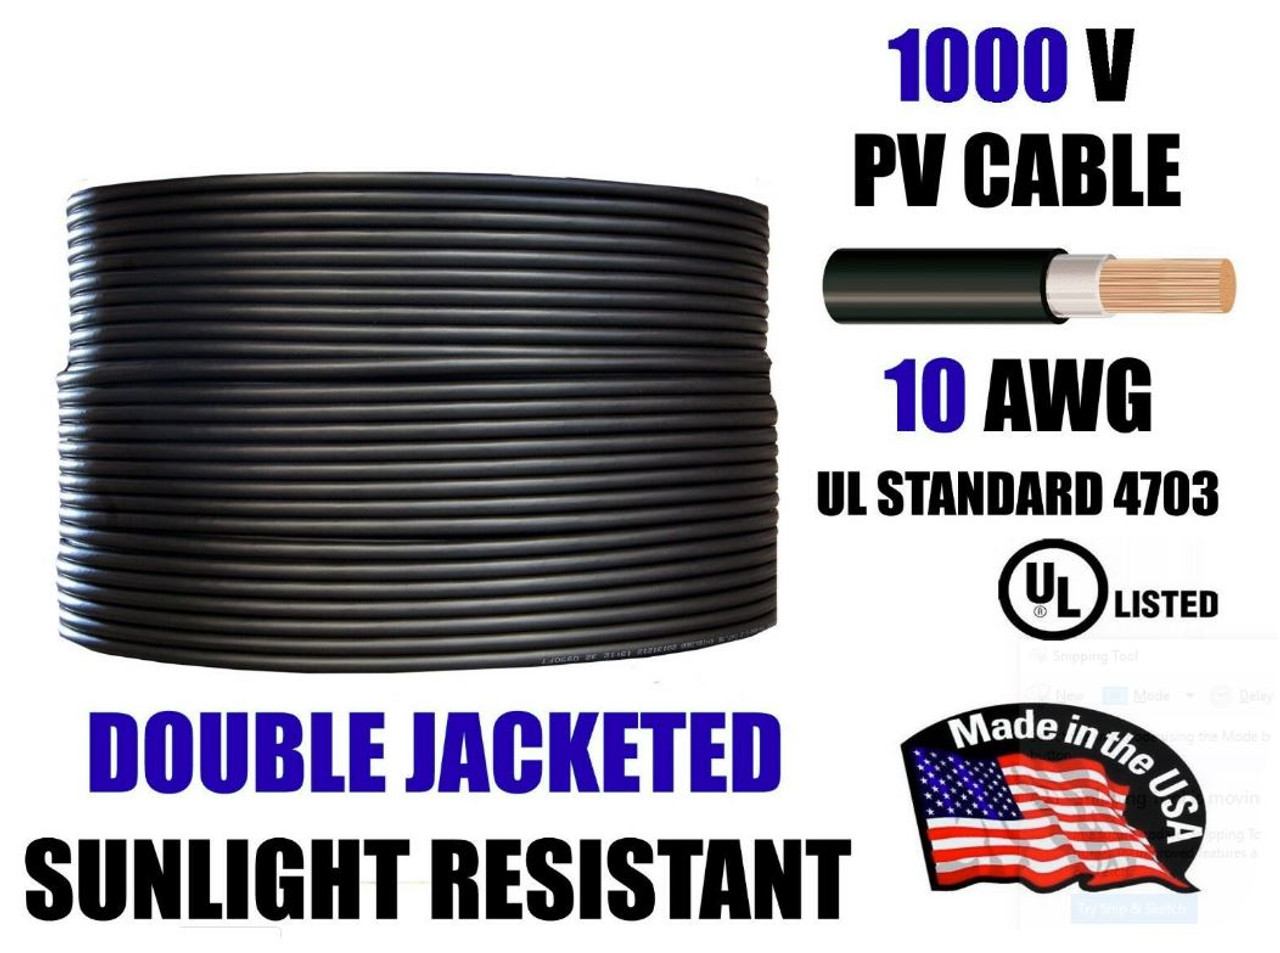 10 AWG Gauge PV Wire 1000V Pre-Cut 5-300 foot for Solar Installation Double Jacketed Copper, Sunlight Resistant, USA Made